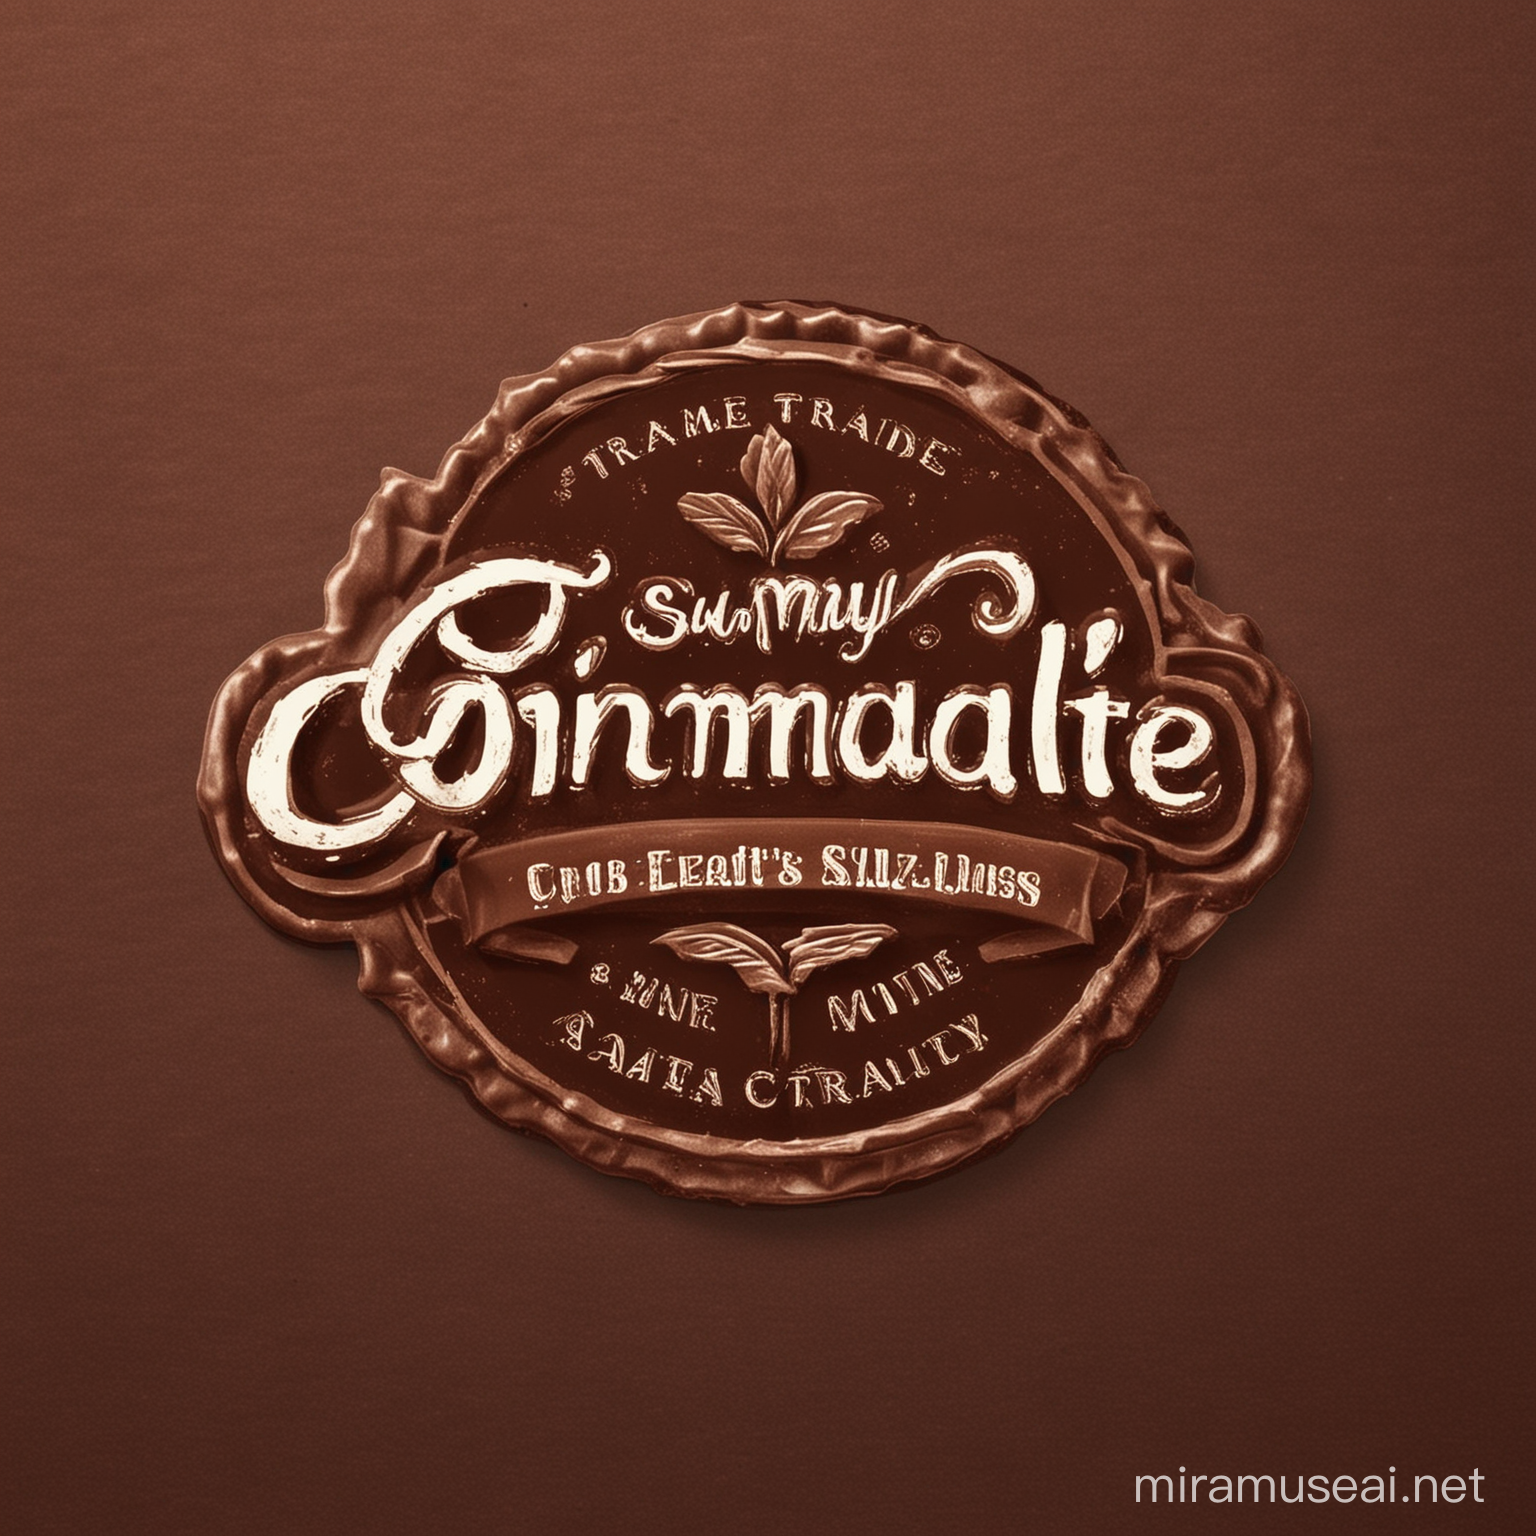 make a logo for my own company yummy chocolate that is eco and fair traide